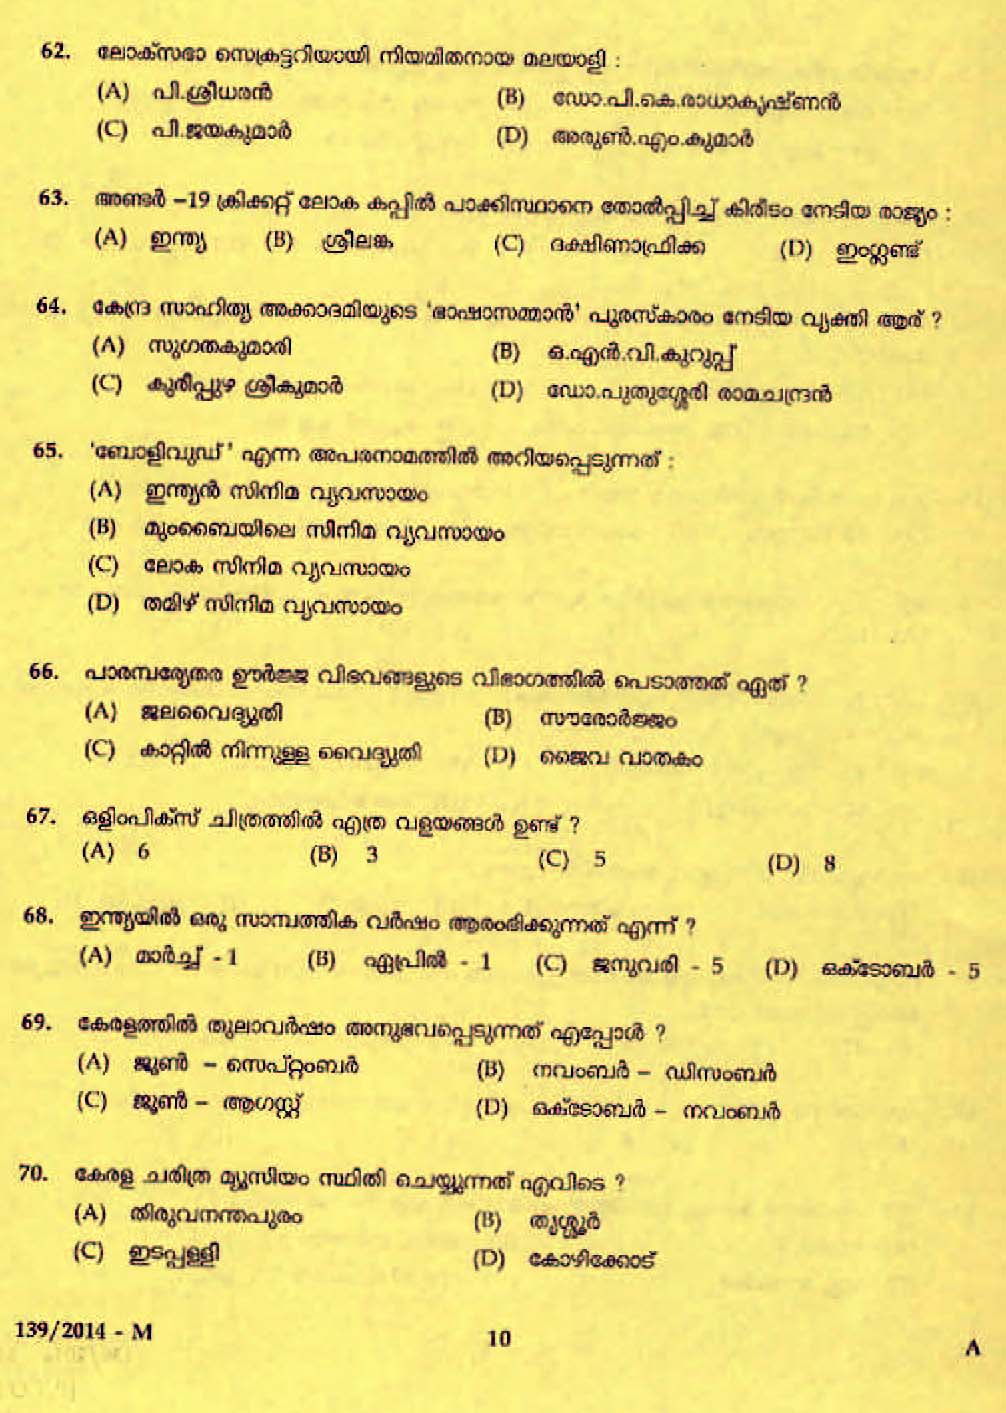 LD Clerk Various Question Paper Malayalam 2014 Paper Code 1392014 M 8